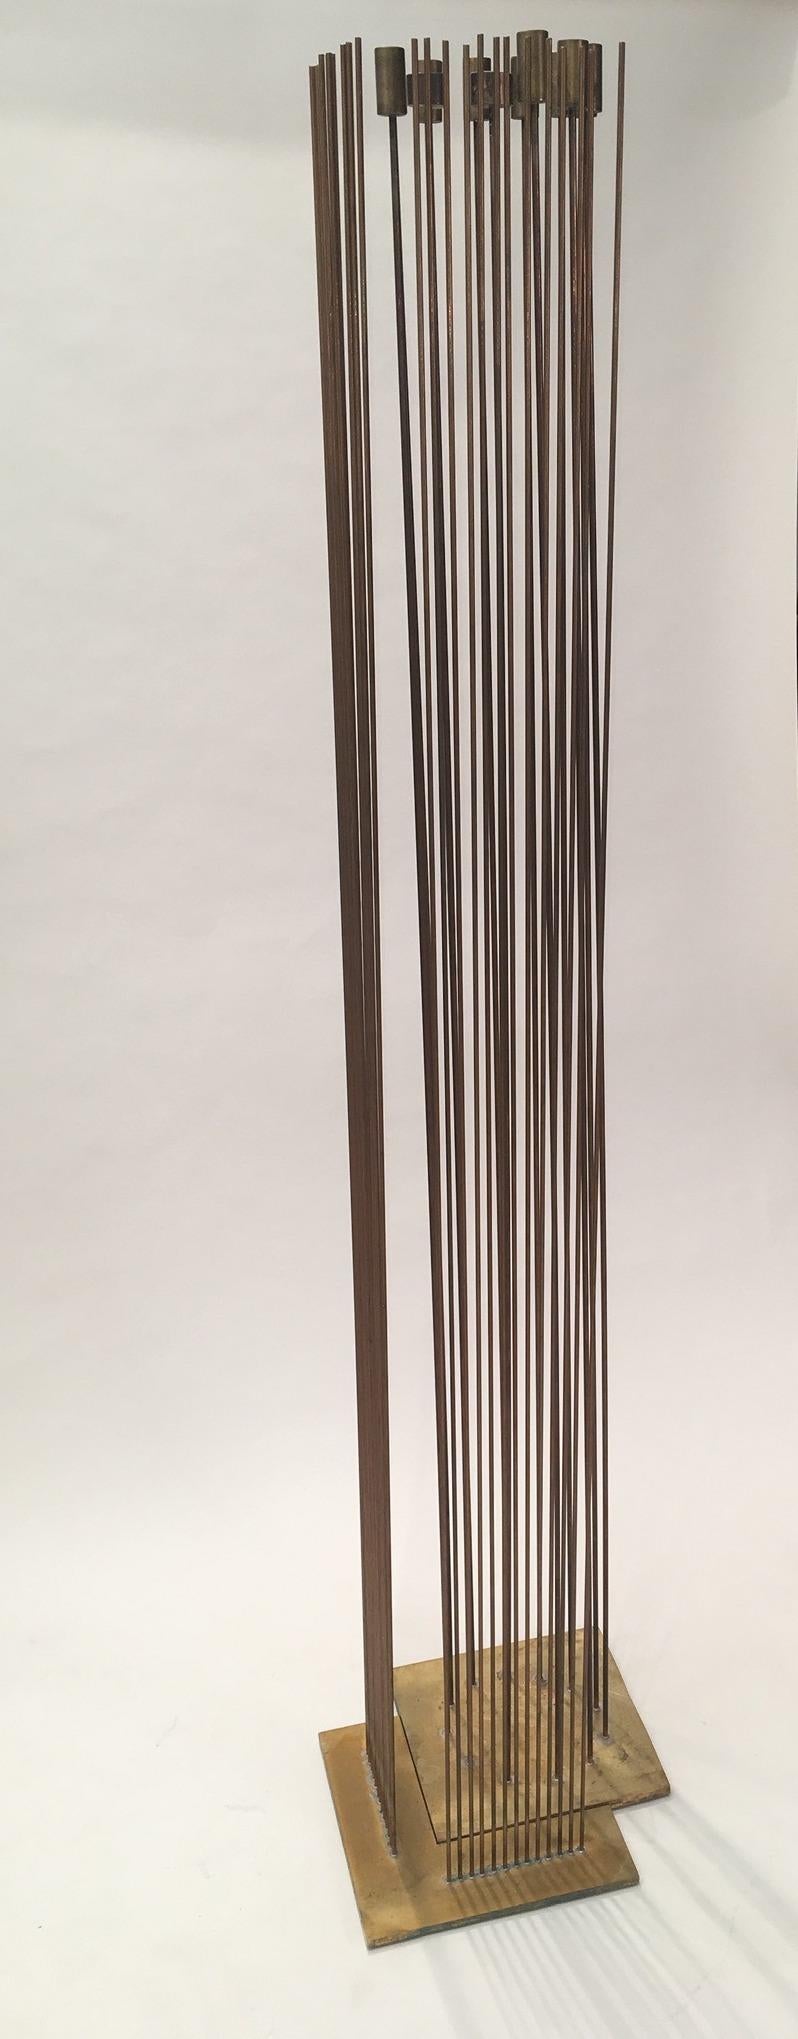 Silvered Val Bertoia Sound Sculptures, 2012 For Sale